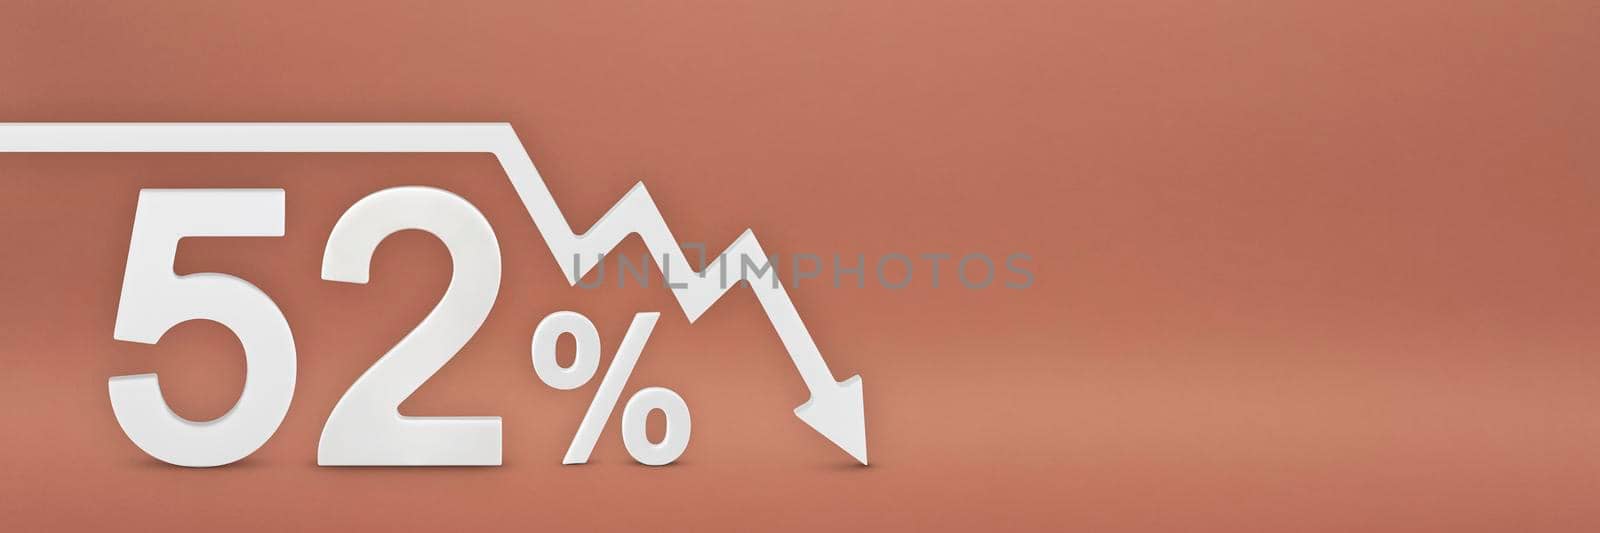 fifty-two percent, the arrow on the graph is pointing down. Stock market crash, bear market, inflation.Economic collapse, collapse of stocks.3d banner,52 percent discount sign on a red background